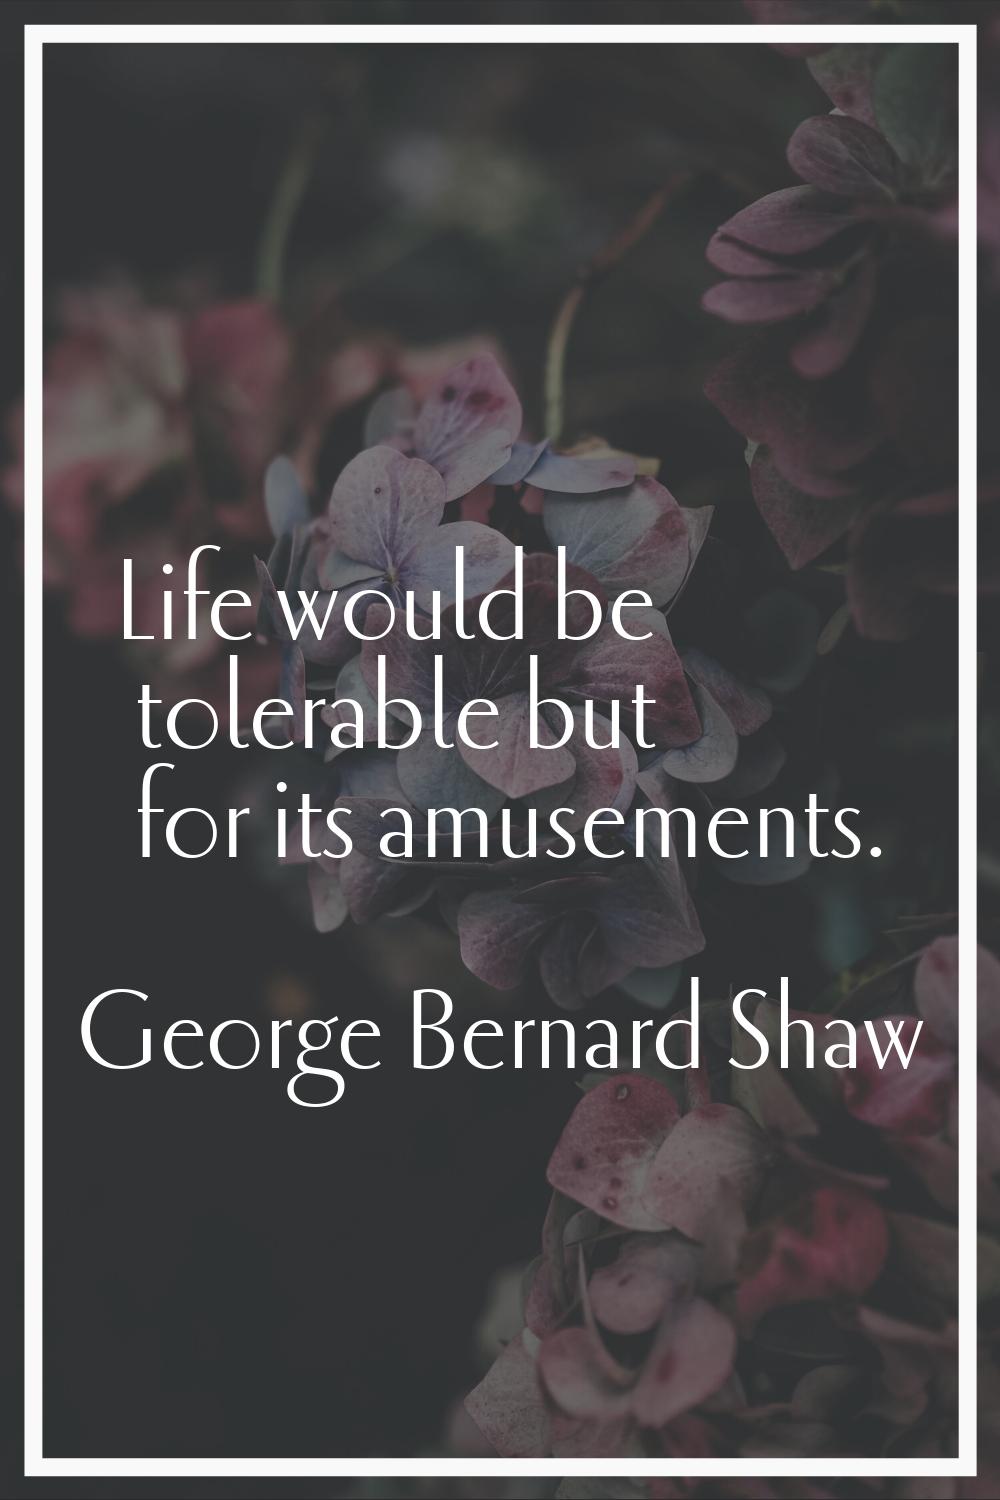 Life would be tolerable but for its amusements.